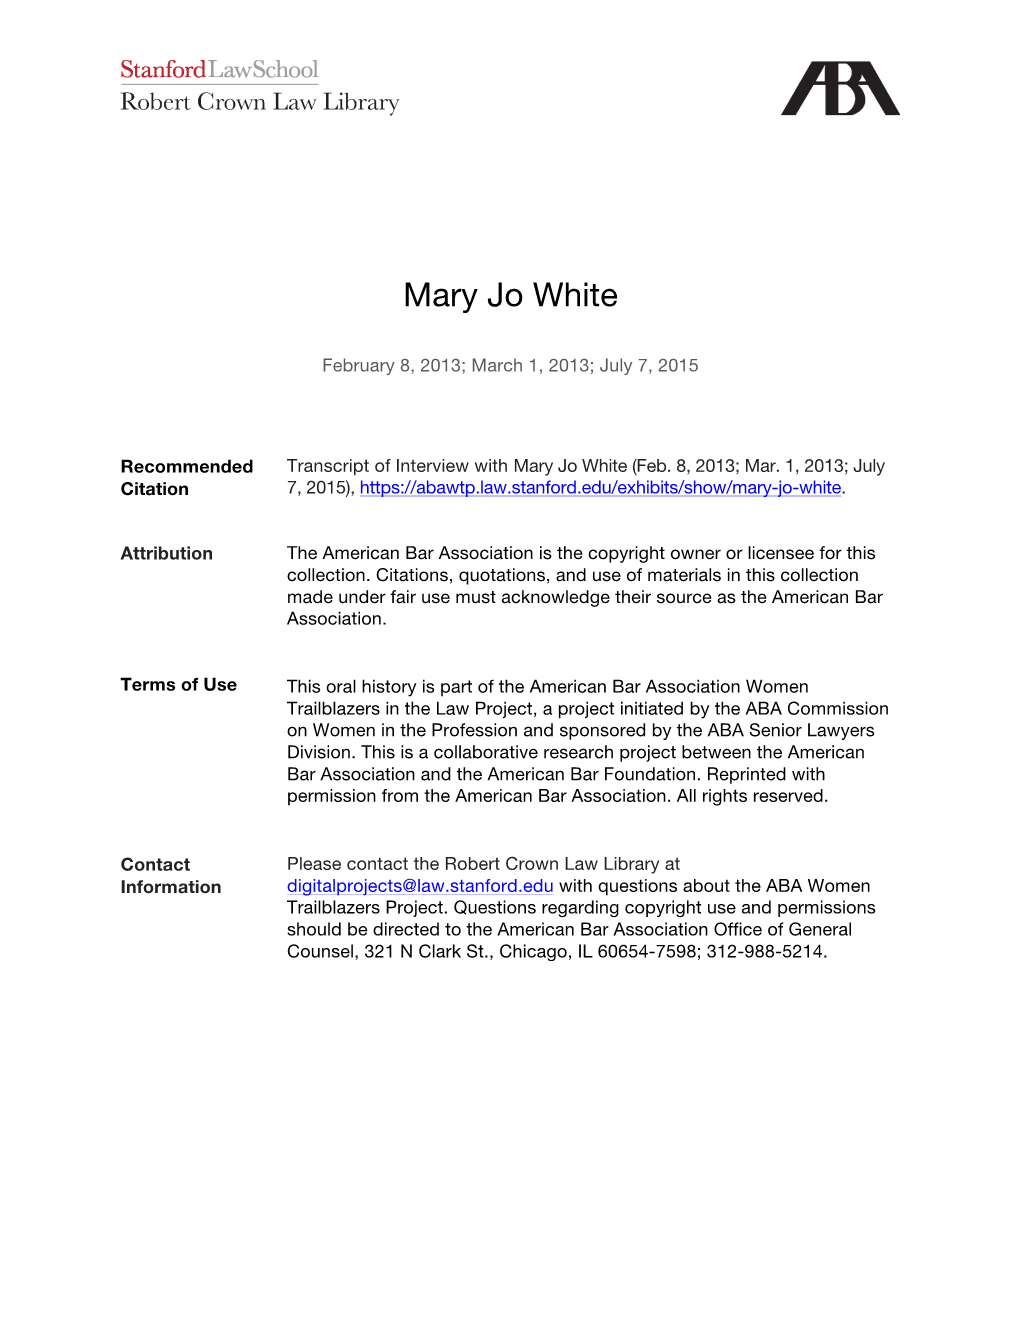 Transcript of Interview with Mary Jo White (Feb